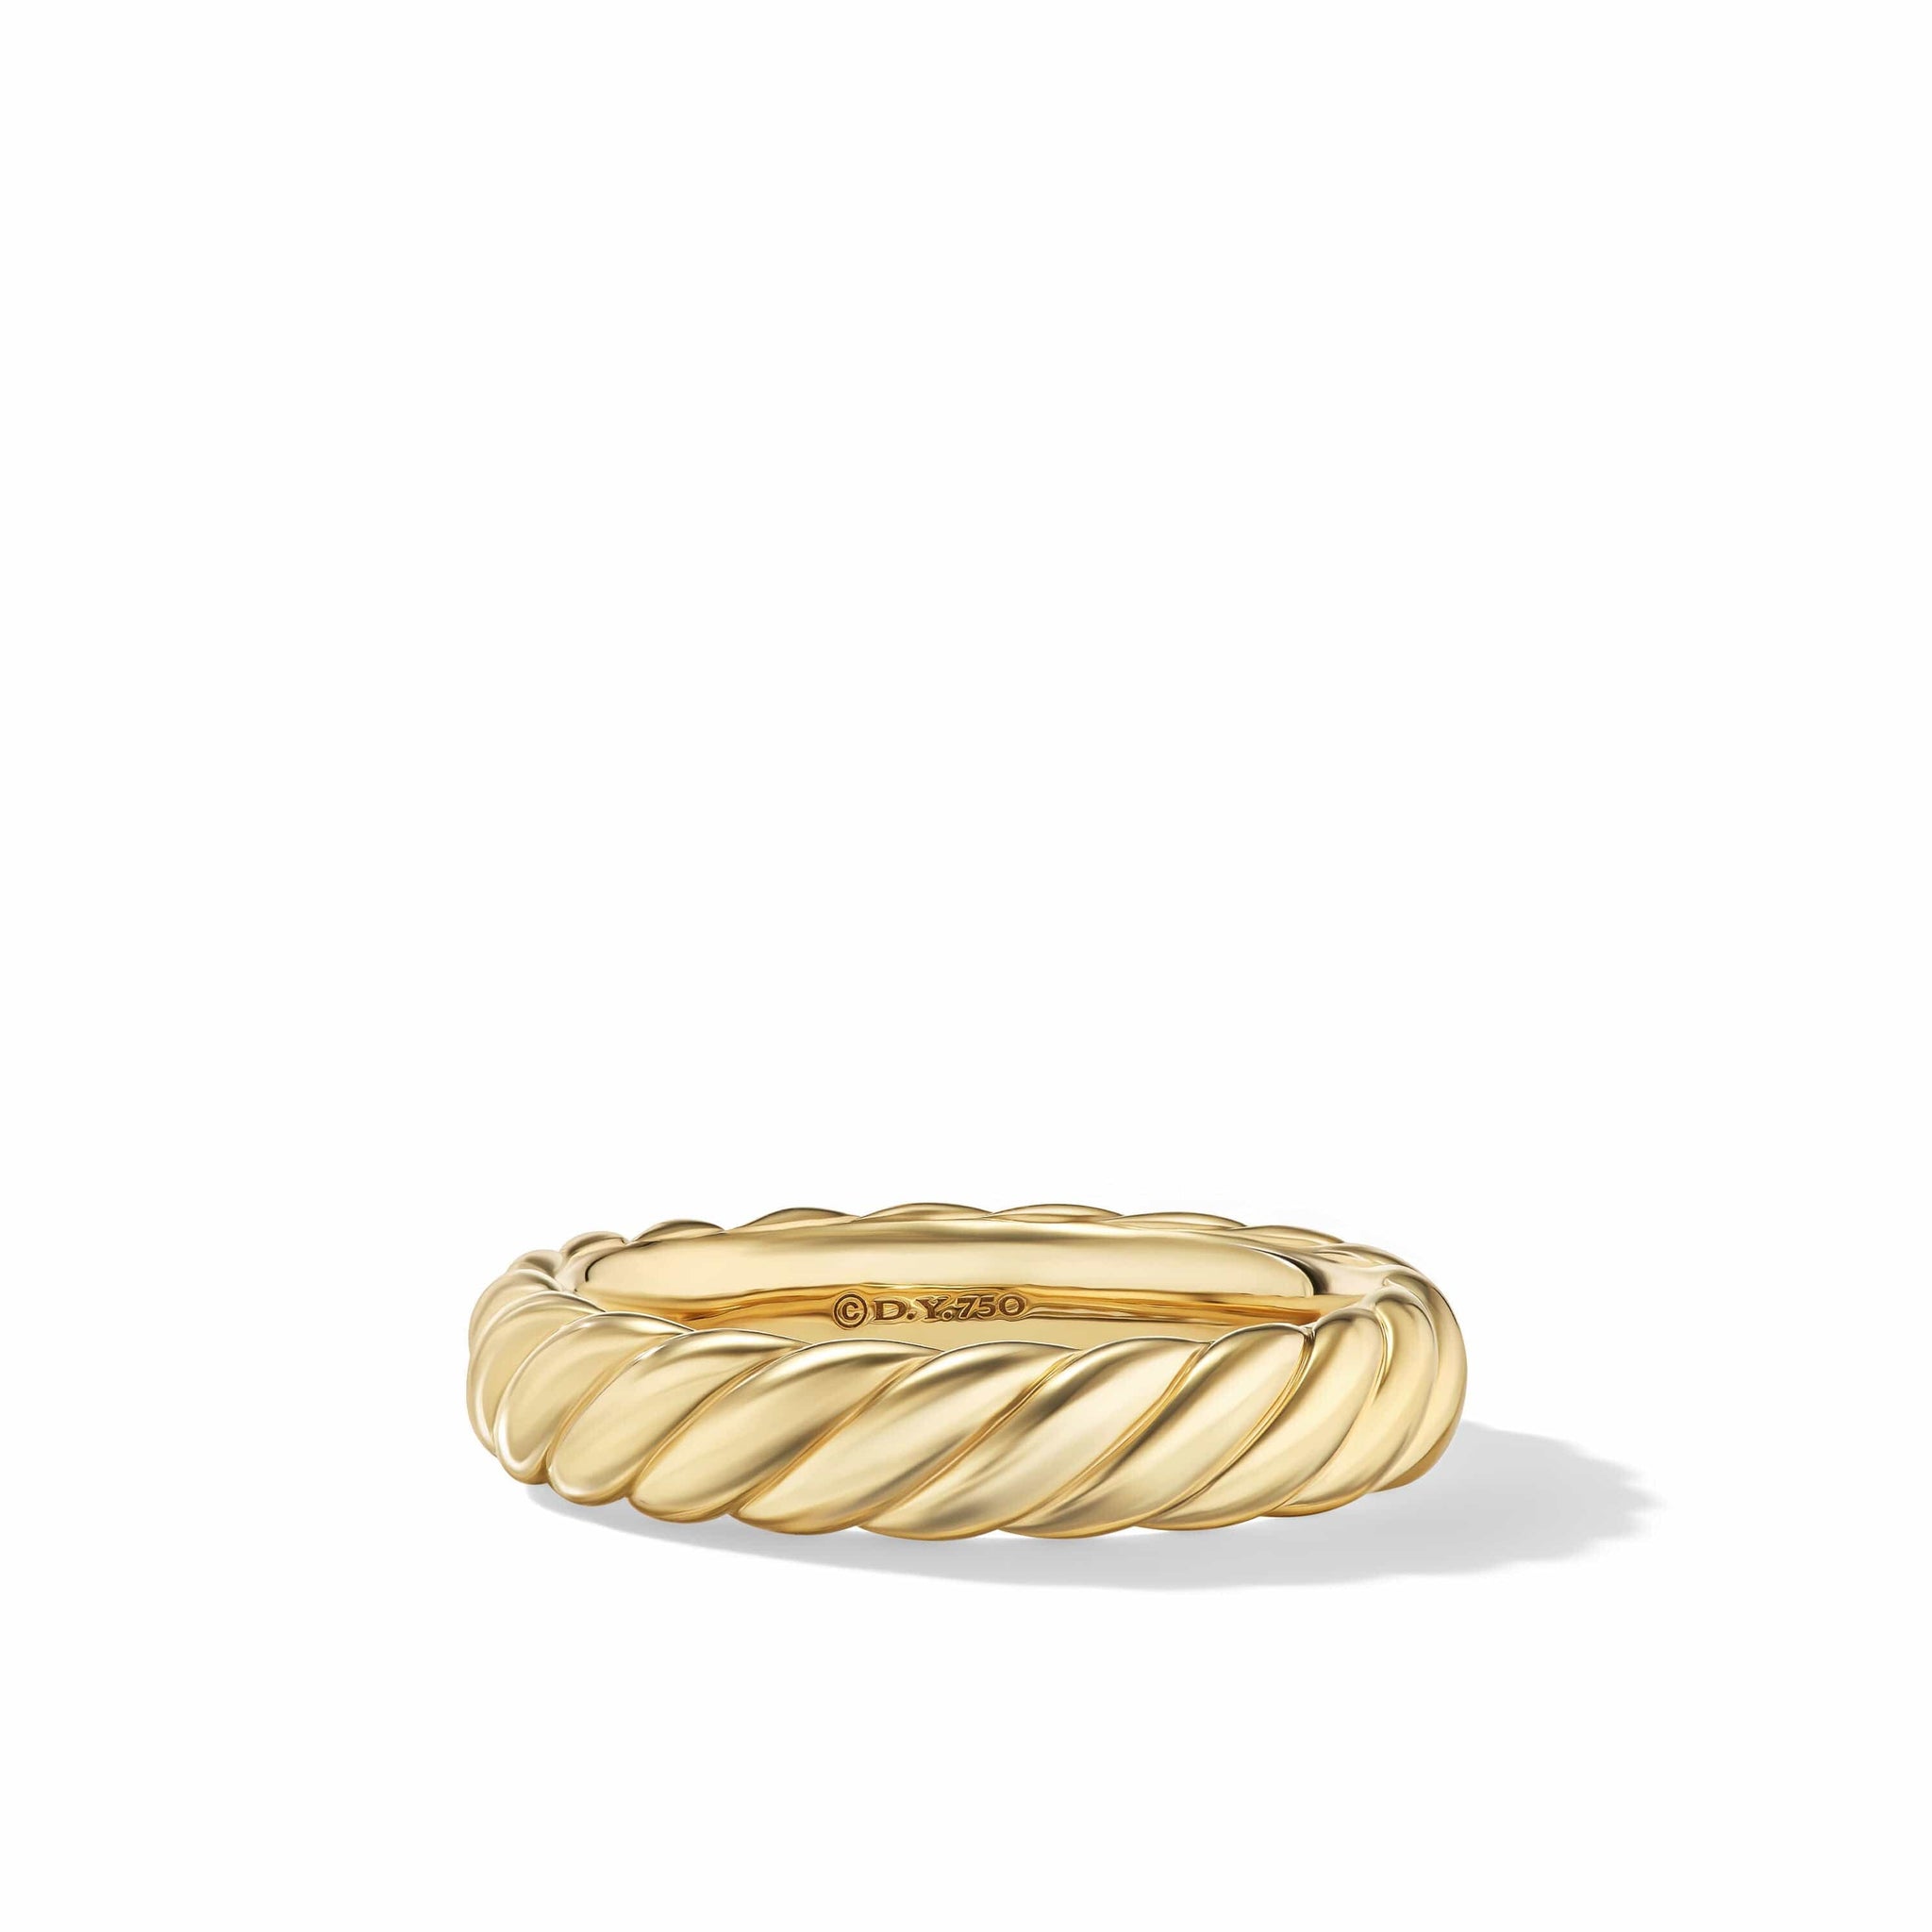 Sculpted Cable Bangle Bracelet in 18K Yellow Gold with Diamonds